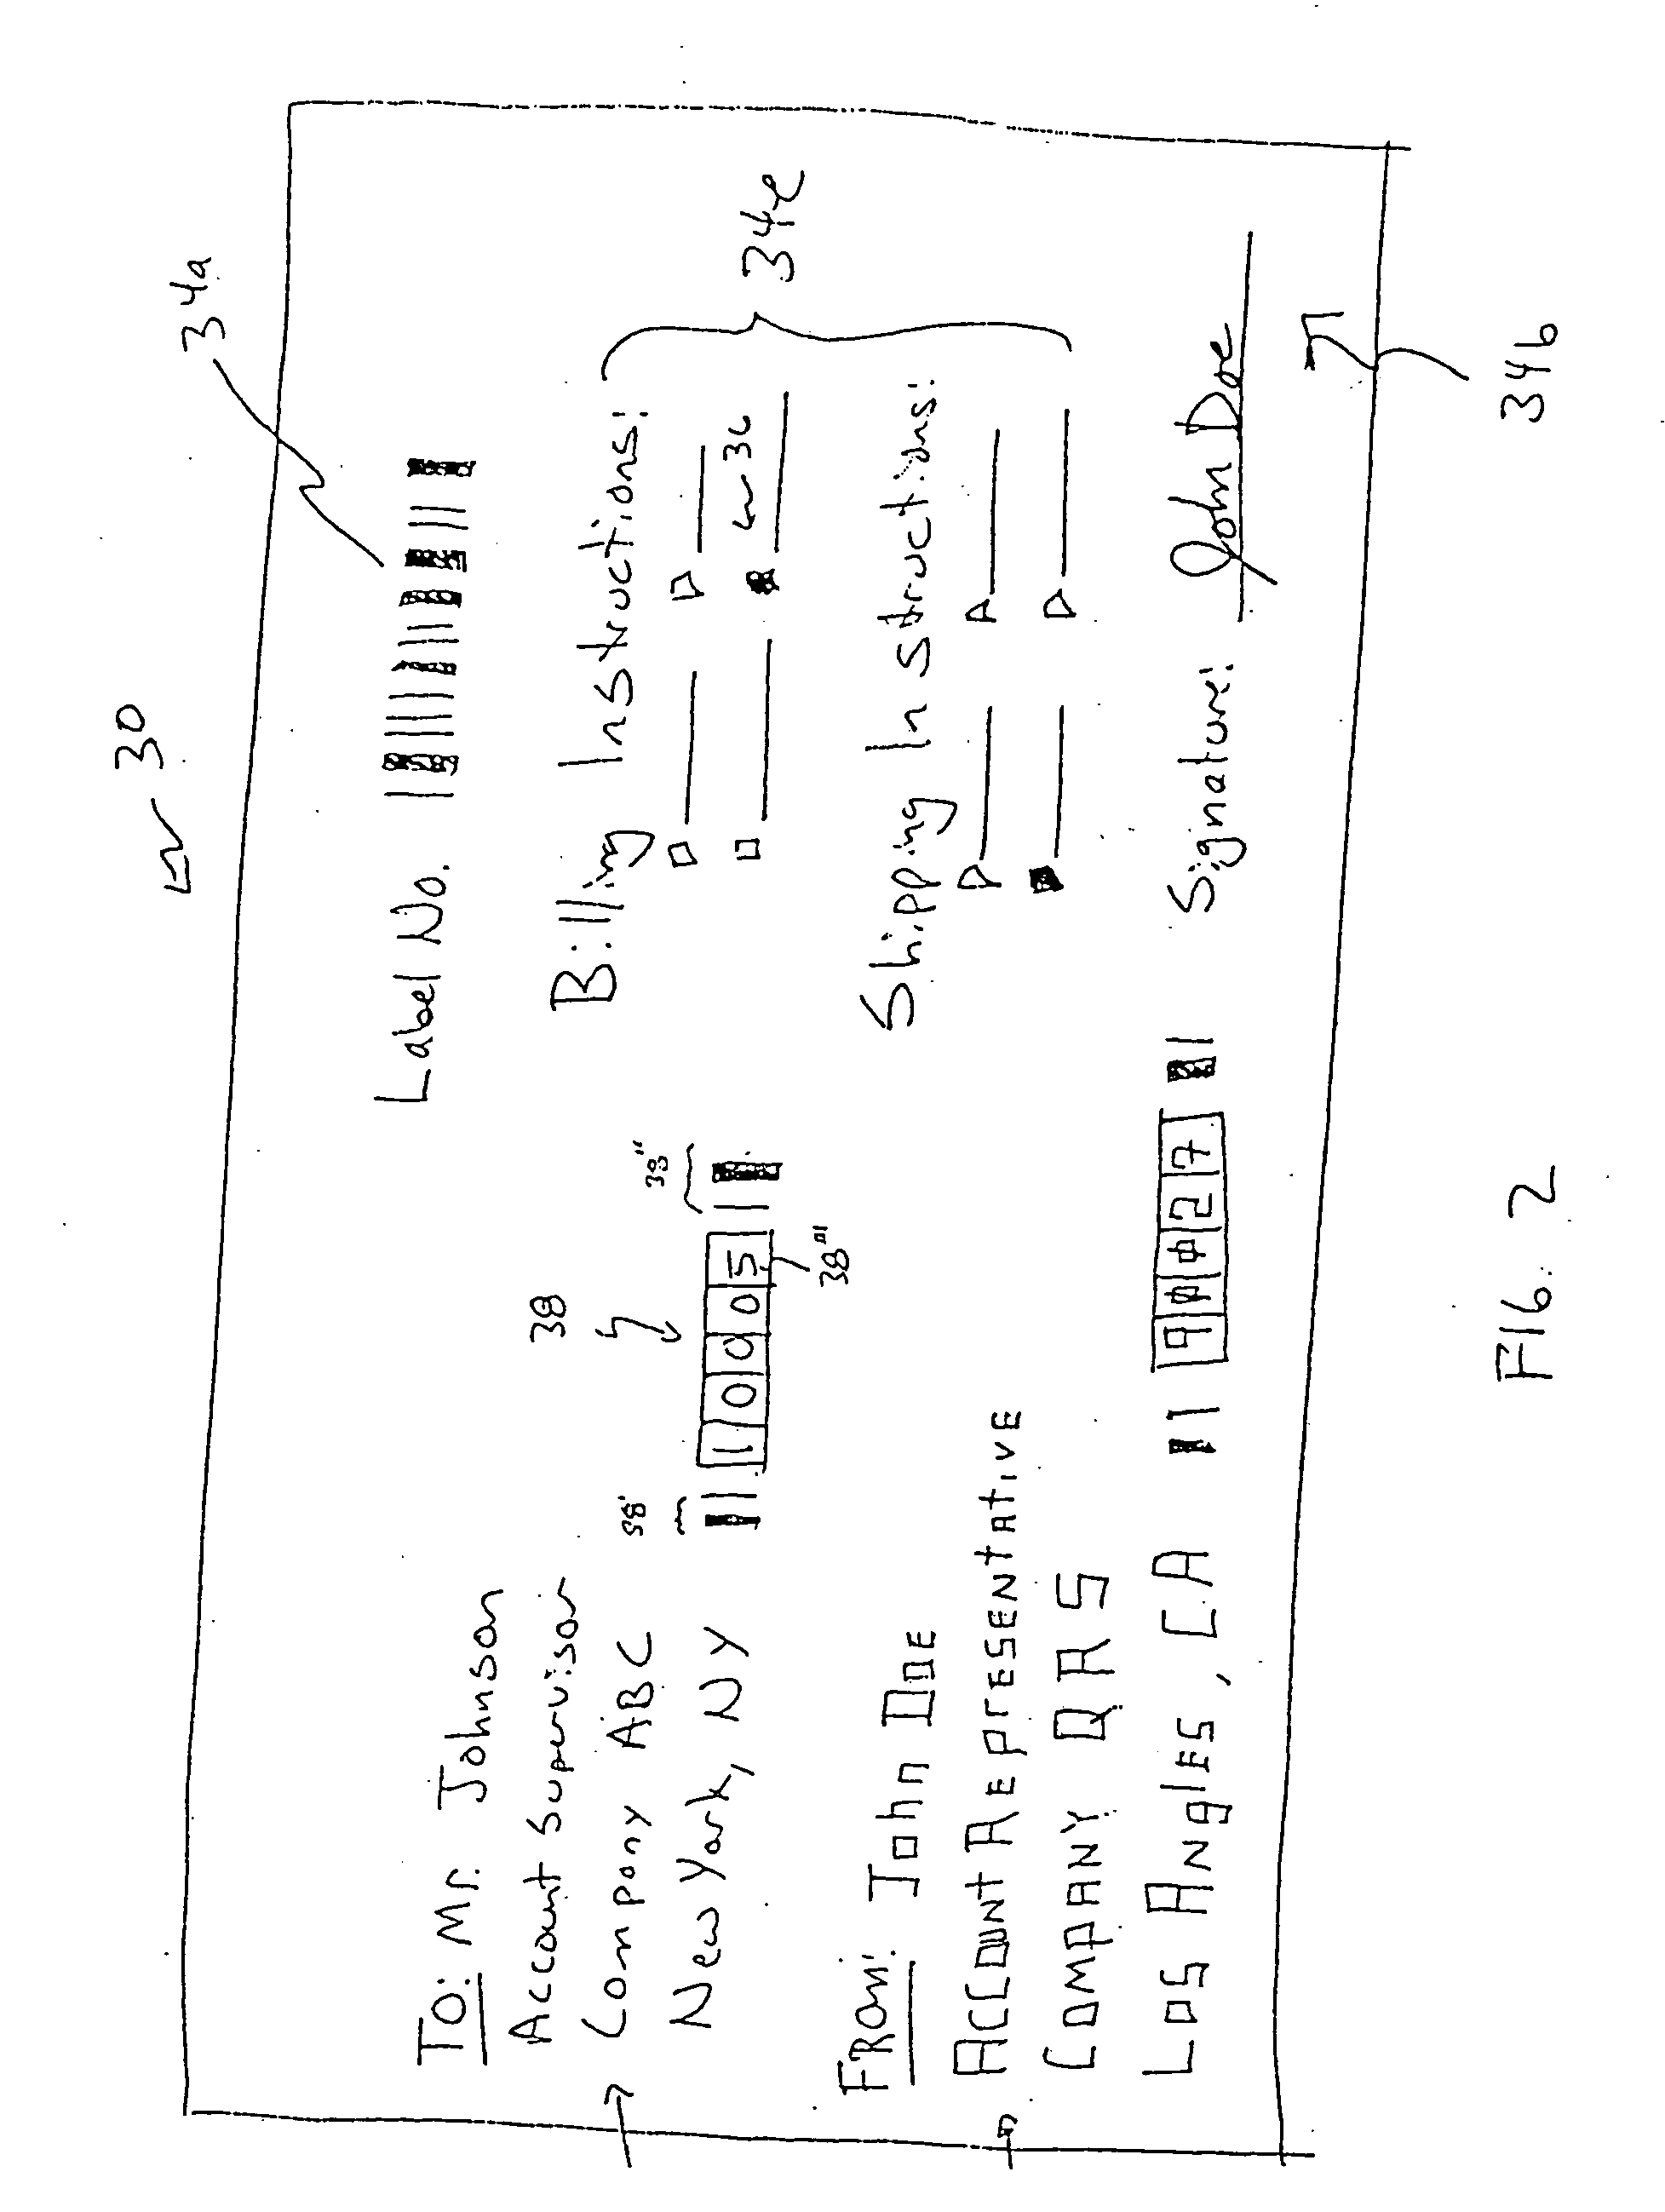 System and method to automatically discriminate between a signature and a barcode